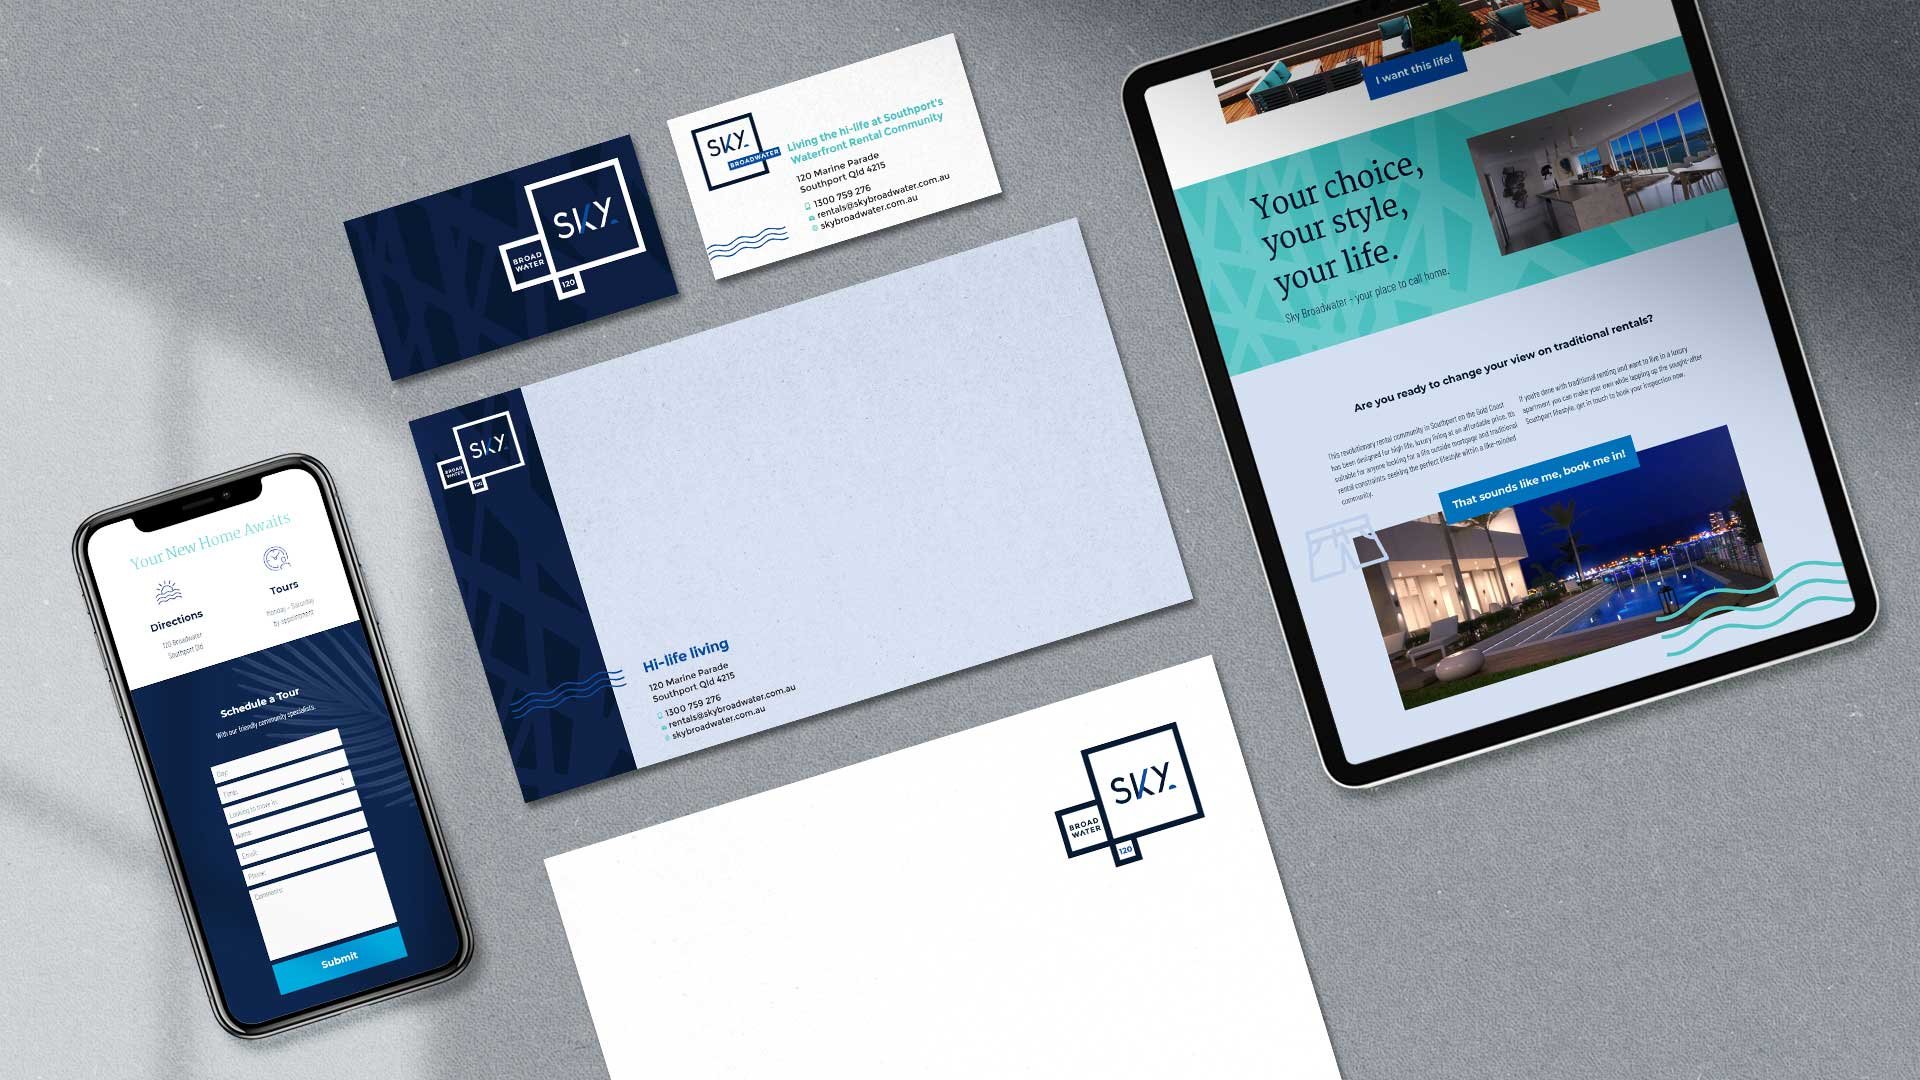 An assortment of real estate branding materials featuring the 'SKY' brand, including business cards, a smartphone, and a tablet displaying the company's website, all set on a textured grey surface.